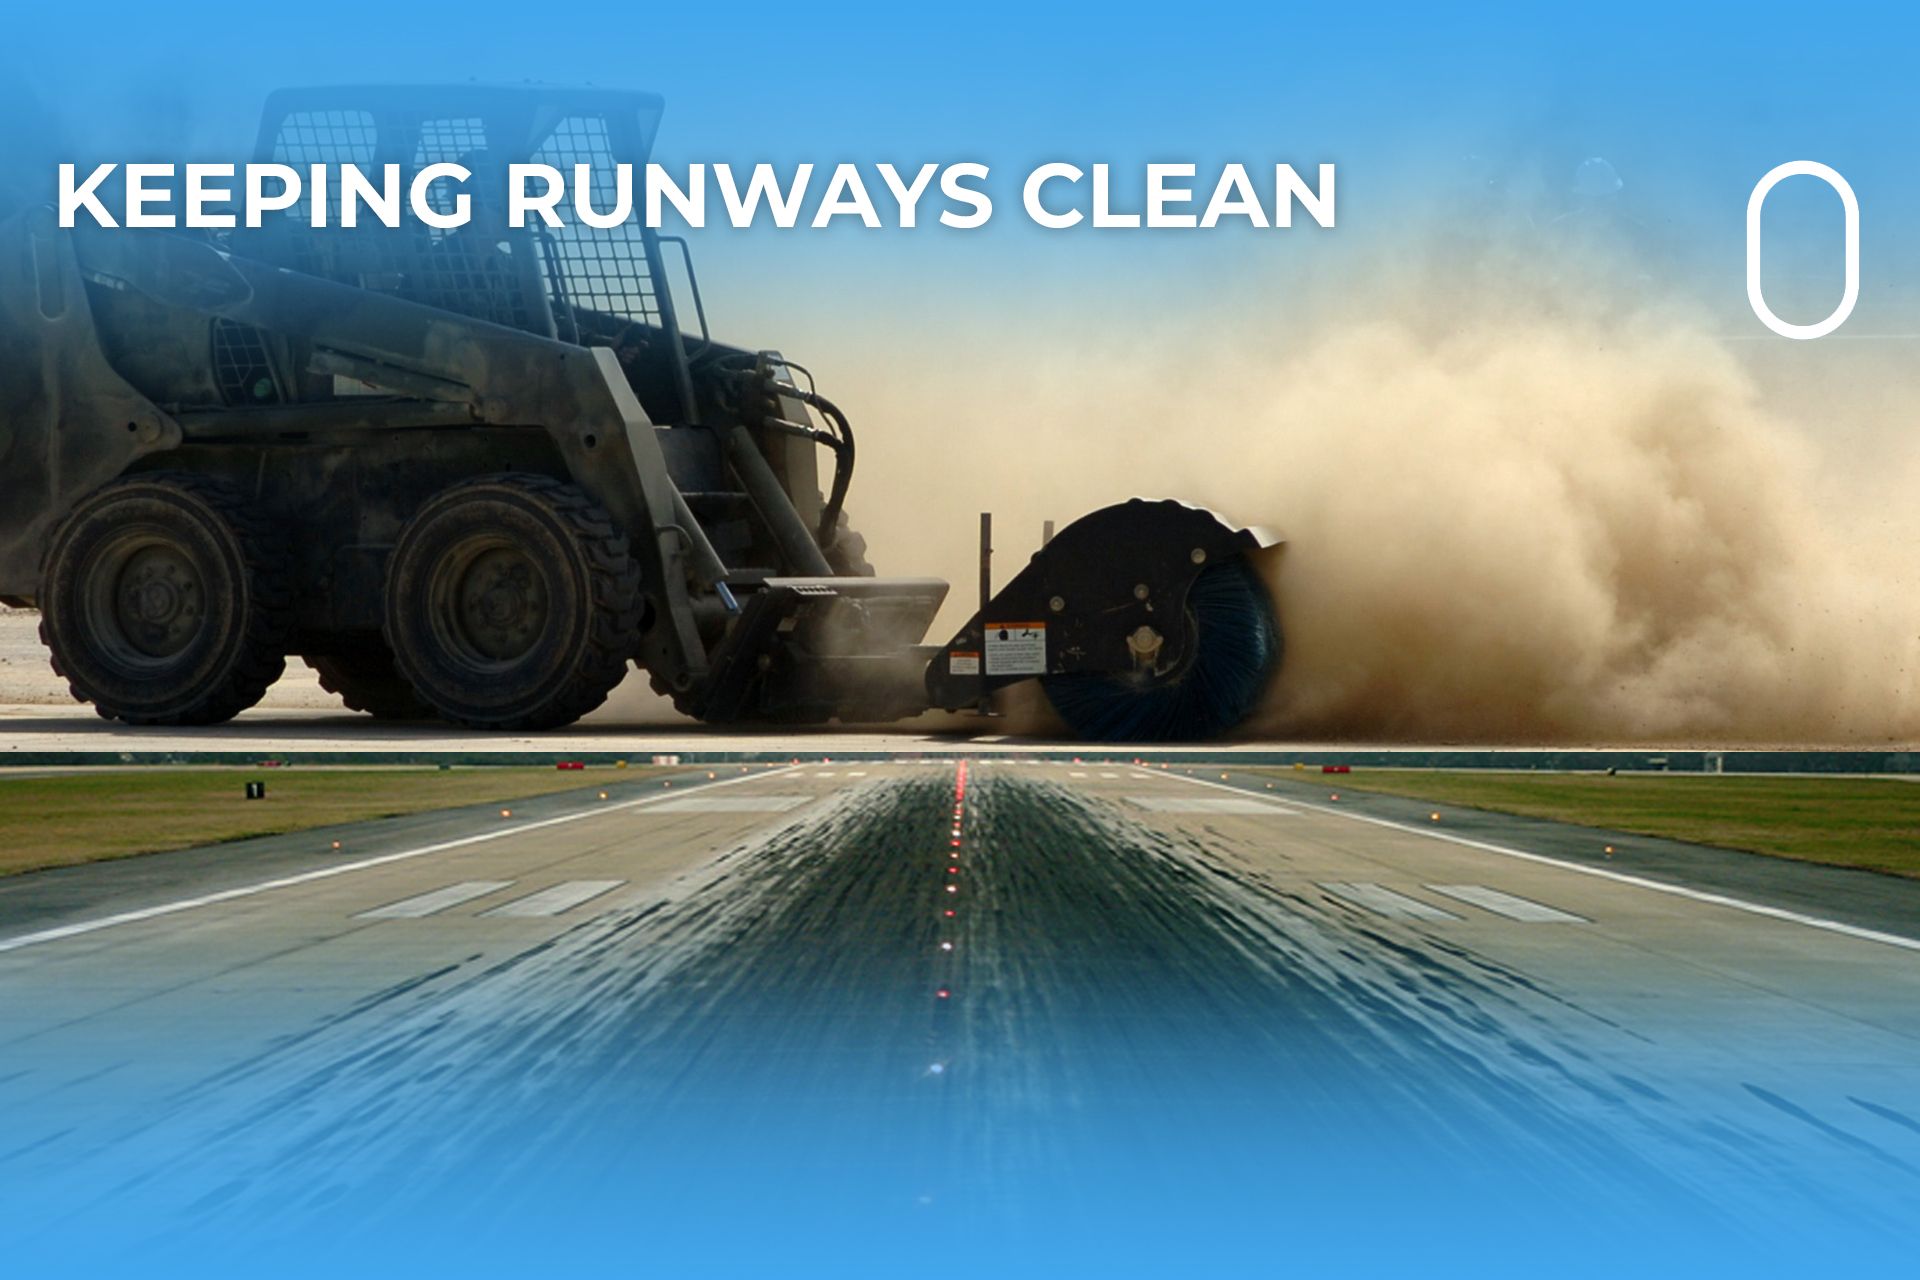 How Are Plane Tire Skid Marks Eliminated From Runways?